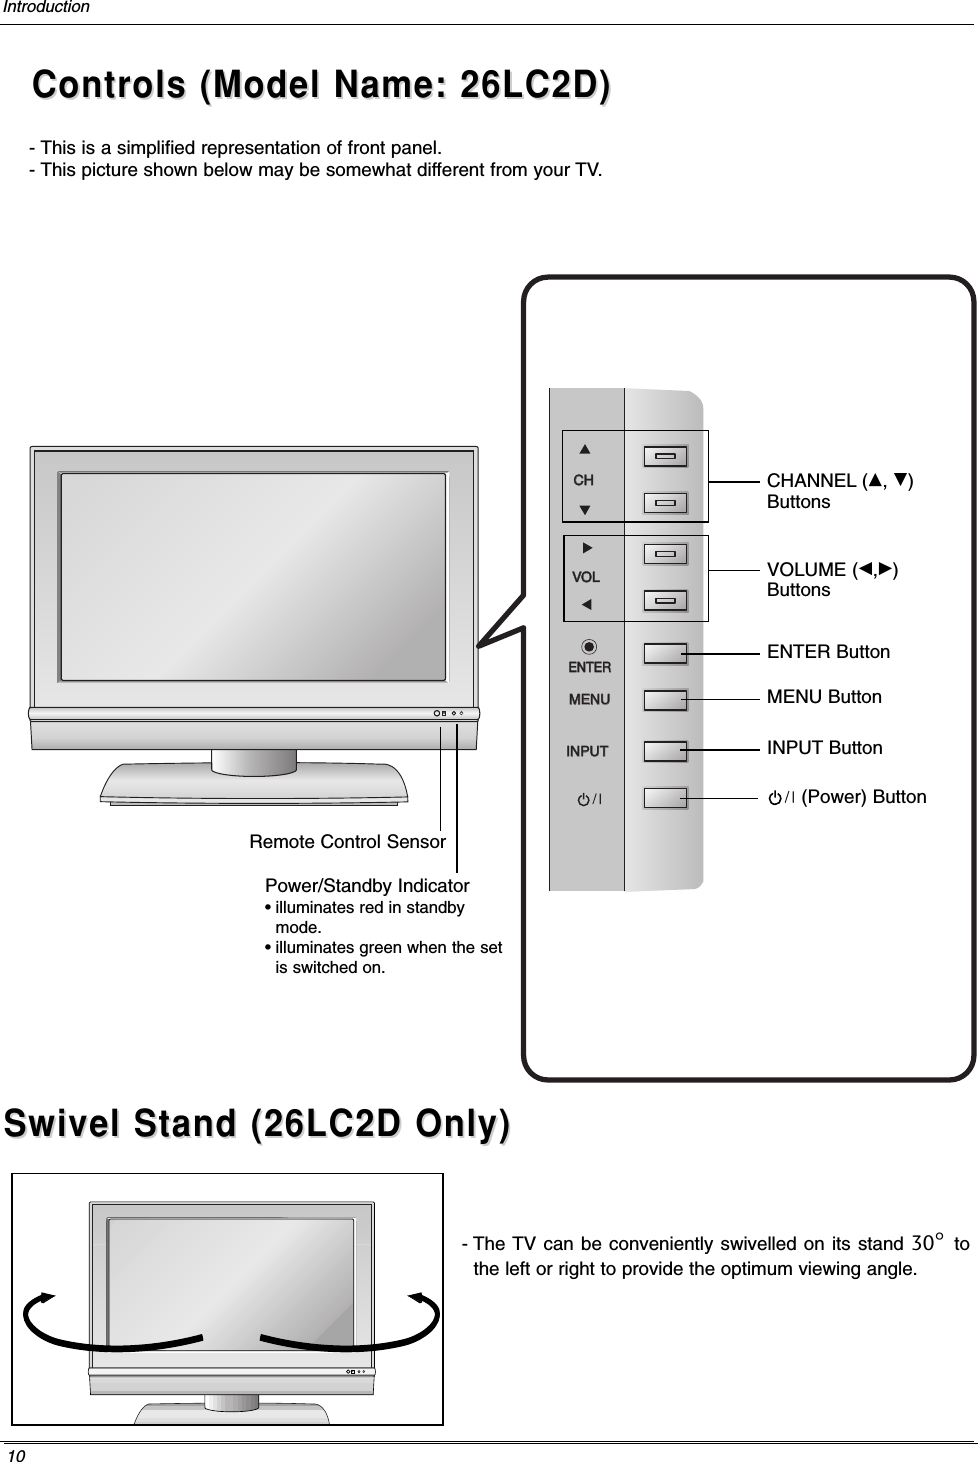 IntroductionControls (Model Name: 26LC2D)Controls (Model Name: 26LC2D)- This is a simplified representation of front panel. - This picture shown below may be somewhat different from your TV.10RCHCHVOLVOLENTERENTERMENUMENUINPUTINPUTCHANNEL (D, E)ButtonsVOLUME (F,G)ButtonsENTER ButtonMENU ButtonINPUT ButtonRemote Control SensorPower/Standby Indicator• illuminates red in standbymode.• illuminates green when the setis switched on.(Power) ButtonSwivel Stand (26LC2D Only)Swivel Stand (26LC2D Only)R- The TV can be conveniently swivelled on its stand 30°tothe left or right to provide the optimum viewing angle.